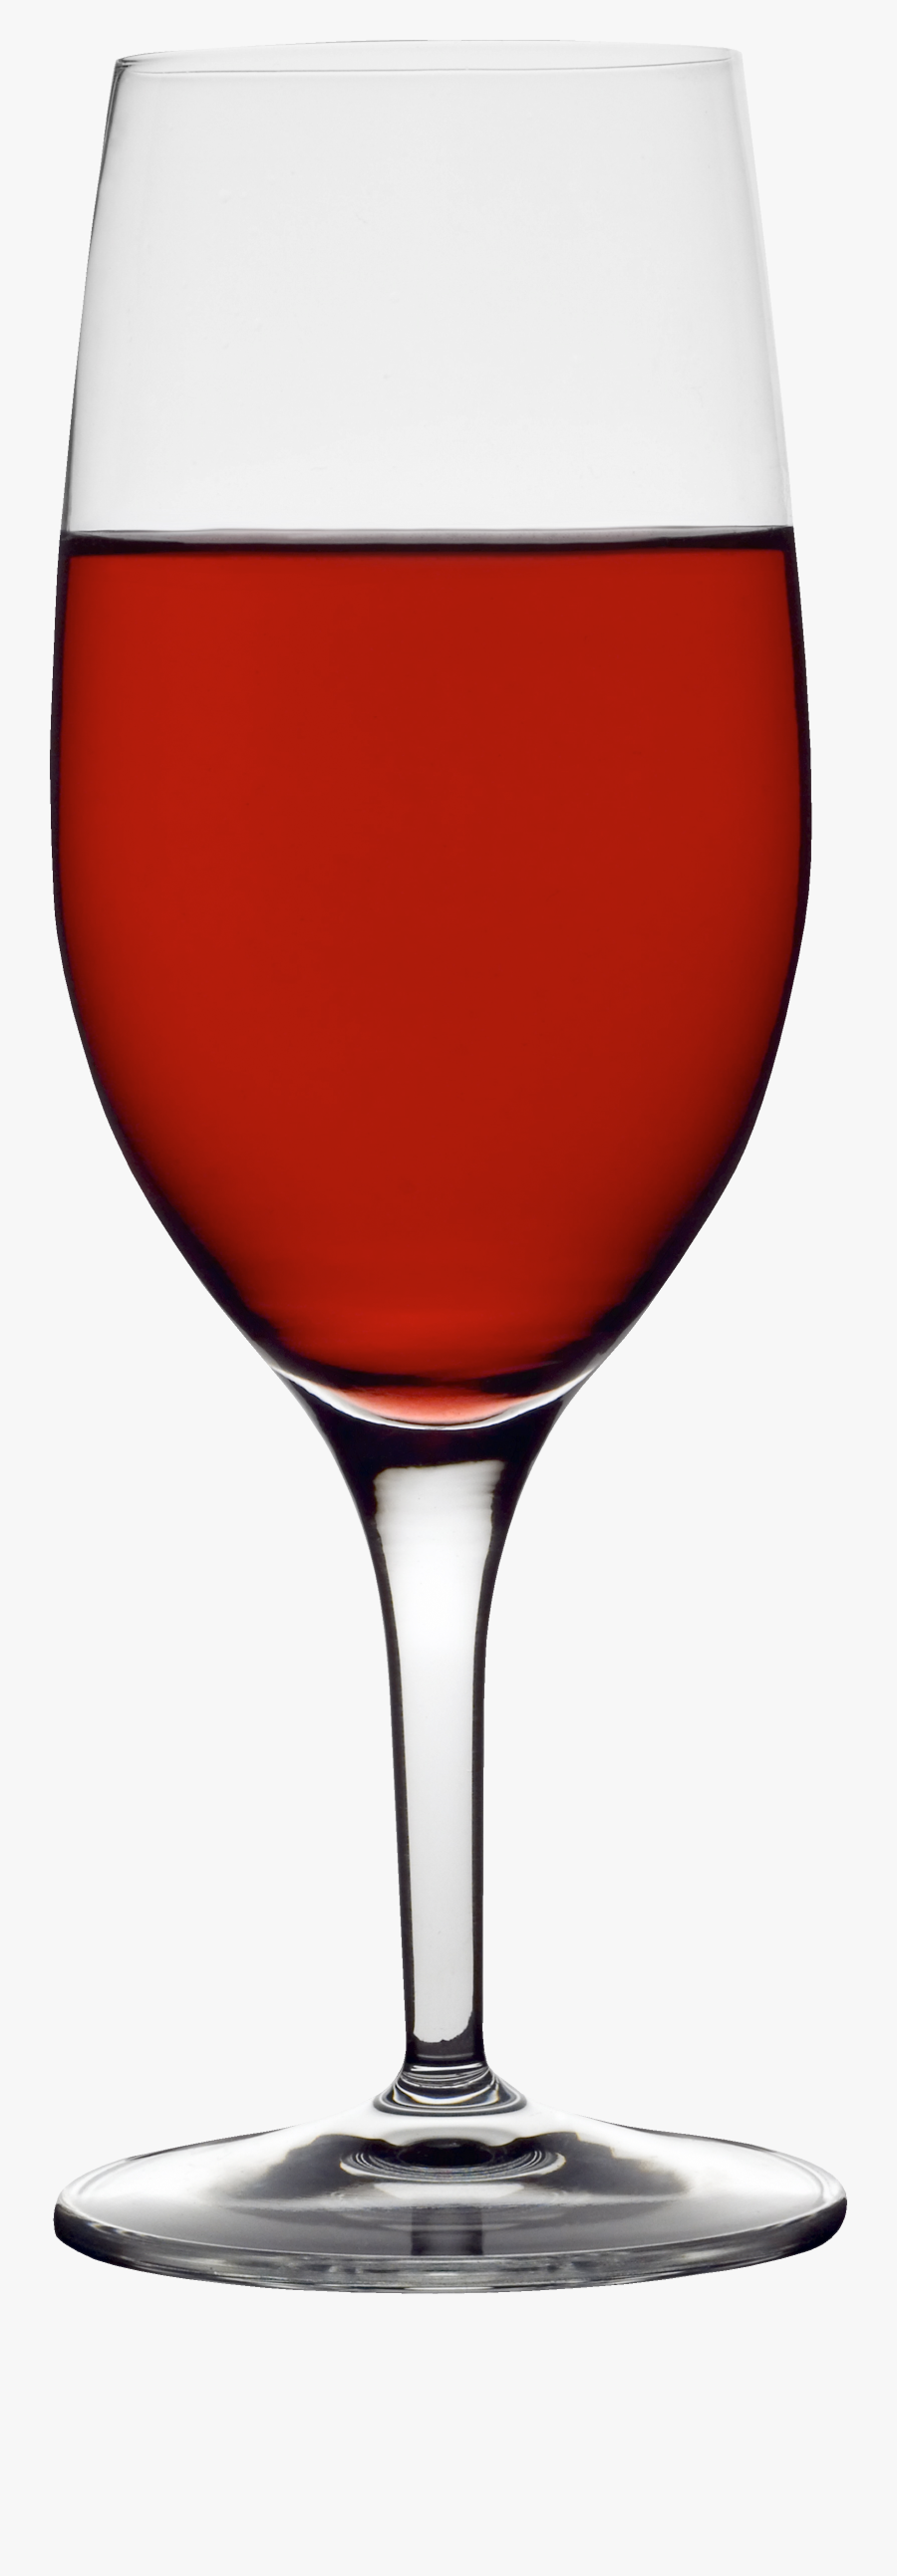 Glass Png Image - Wine Glass Png Clipart, Transparent Clipart